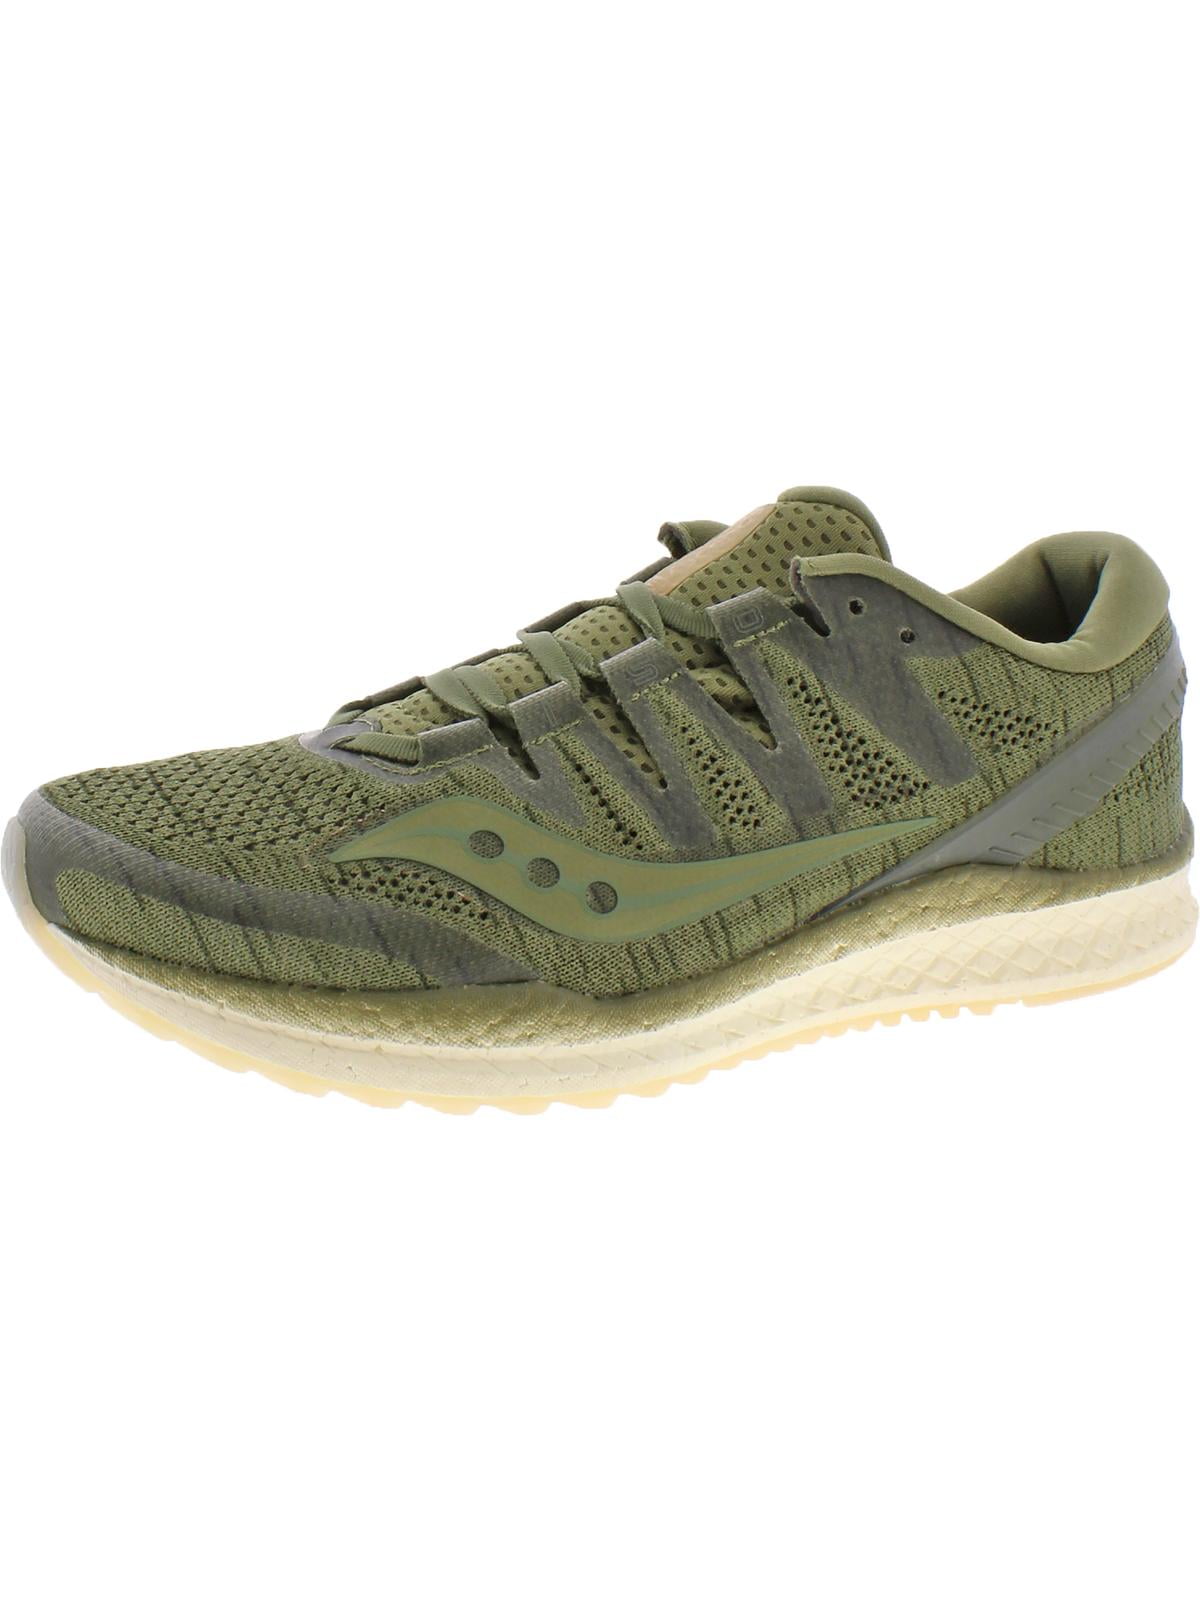 Men's Saucony Freedom ISO 2 Breathable Cushioned Running Trainer Shoes in Green 